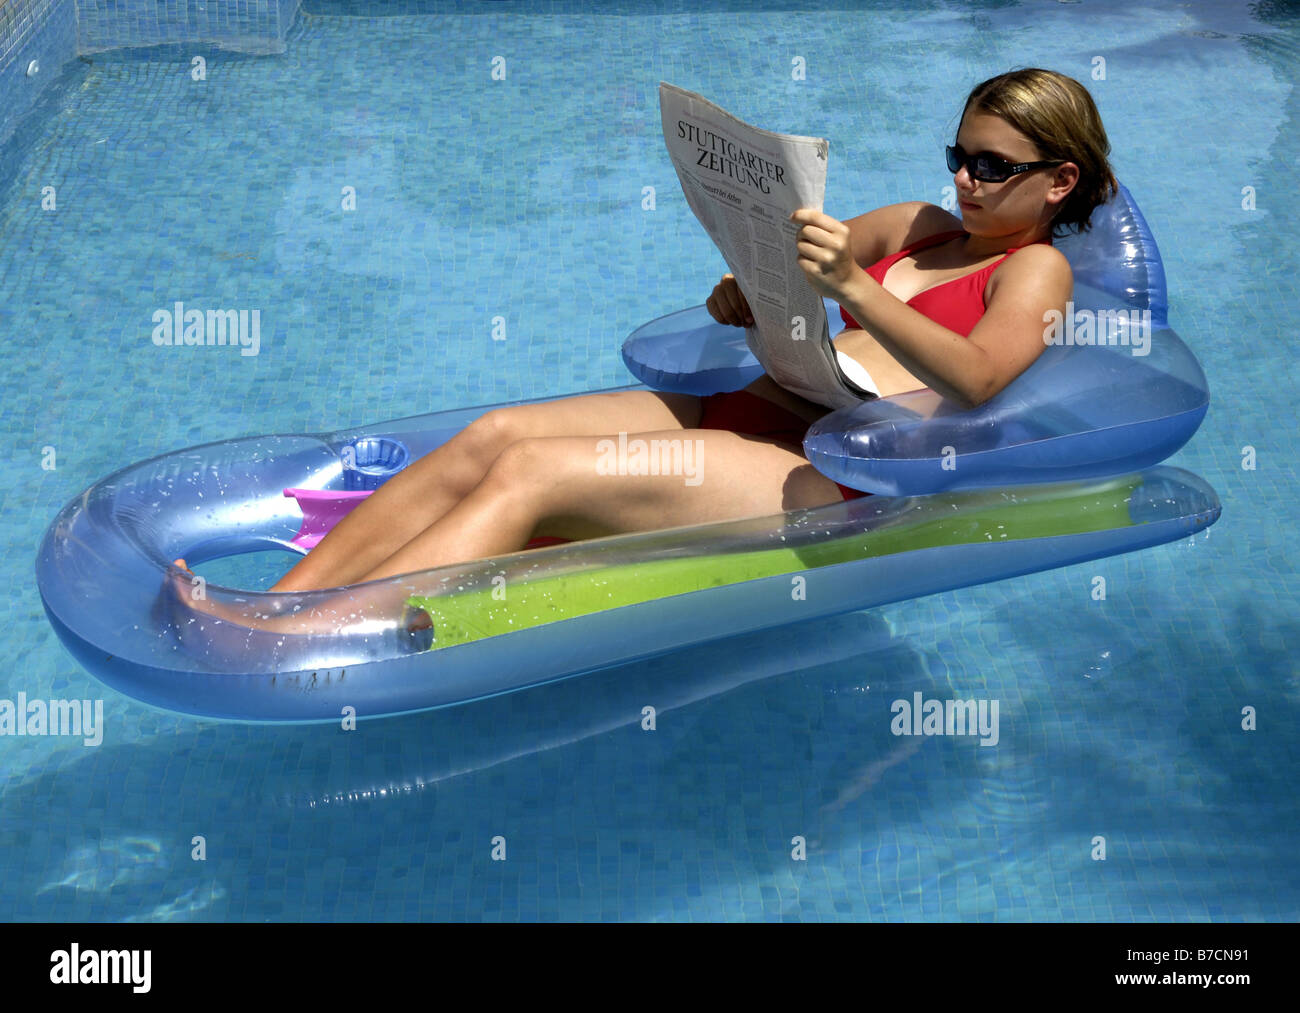 young woman on air bed reading a newspaper Stock Photo